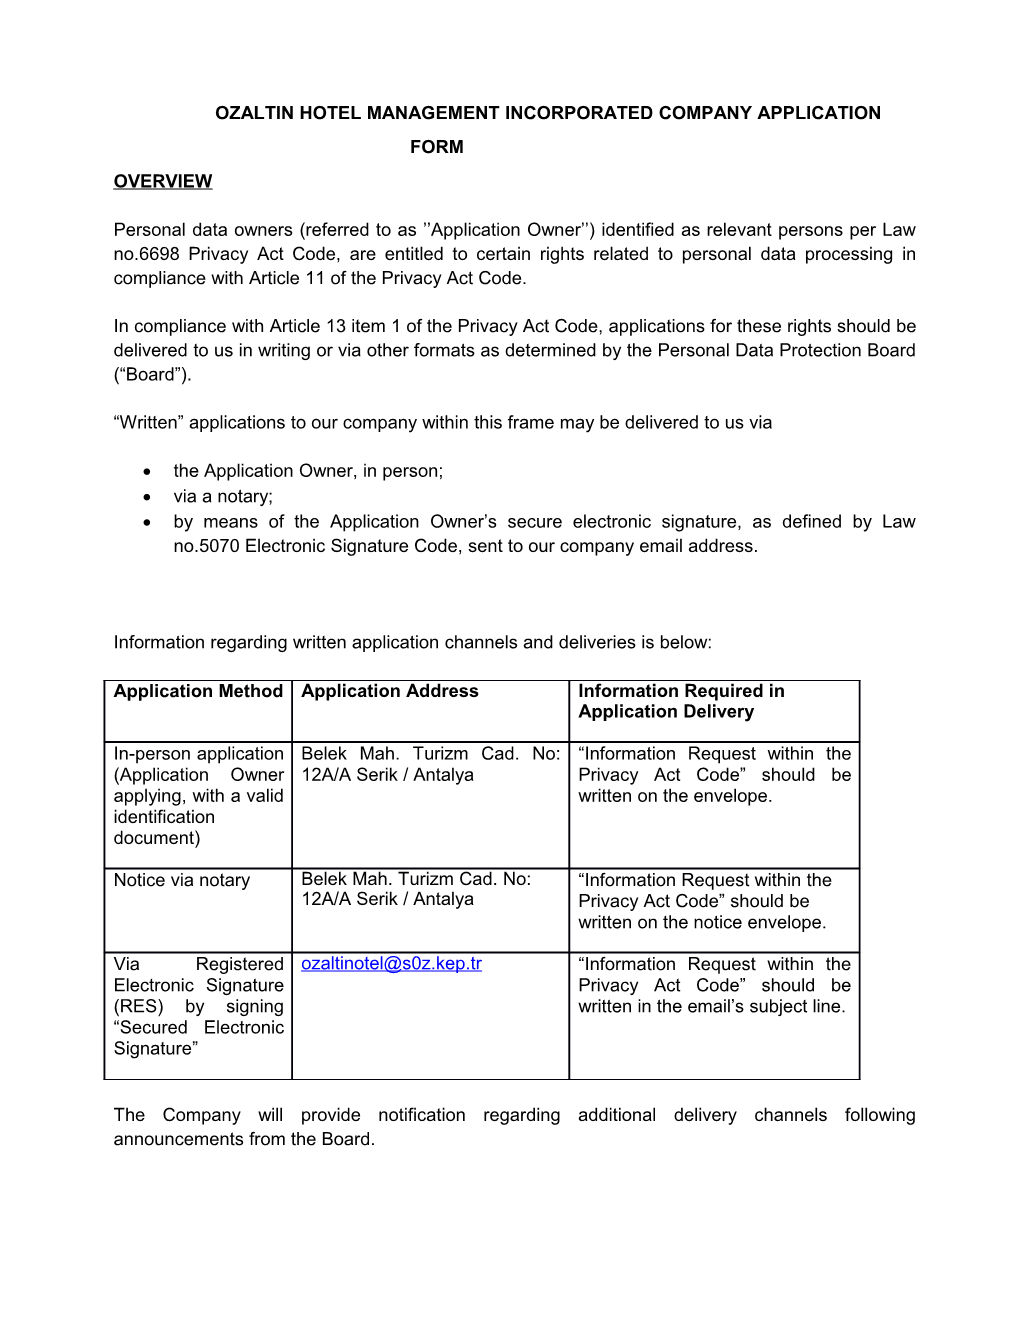 Ozaltin Hotel Management Incorporated Company Application Form